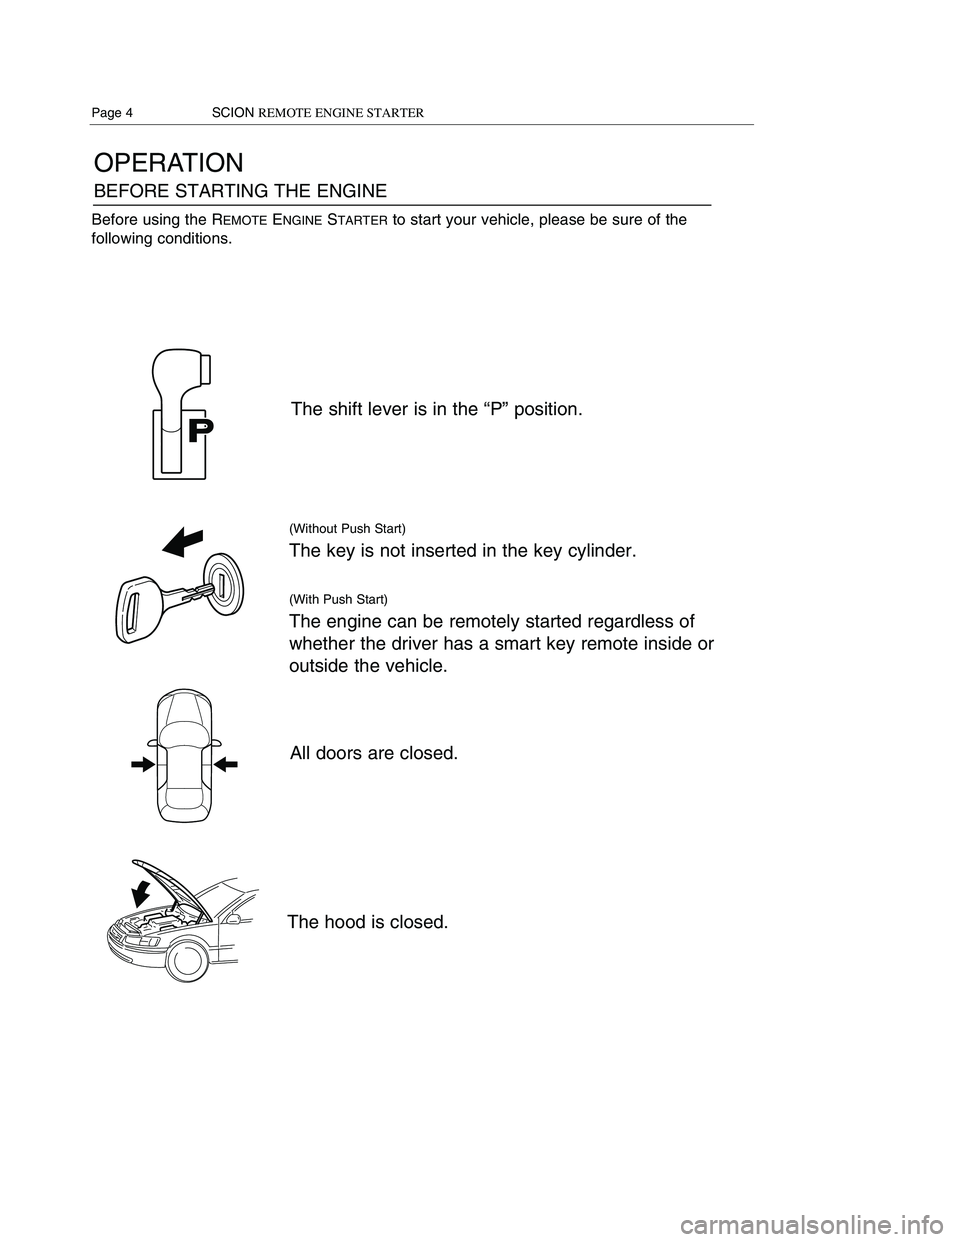 TOYOTA xD 2008  Accessories, Audio & Navigation (in English) 
OPERATION
BEFORE STARTING THE ENGINE
The shift lever is in the “P” position.
(Without Push Start)
The key is not inserted in the key cylinder.
(With Push Start)
The engine can be remotely started